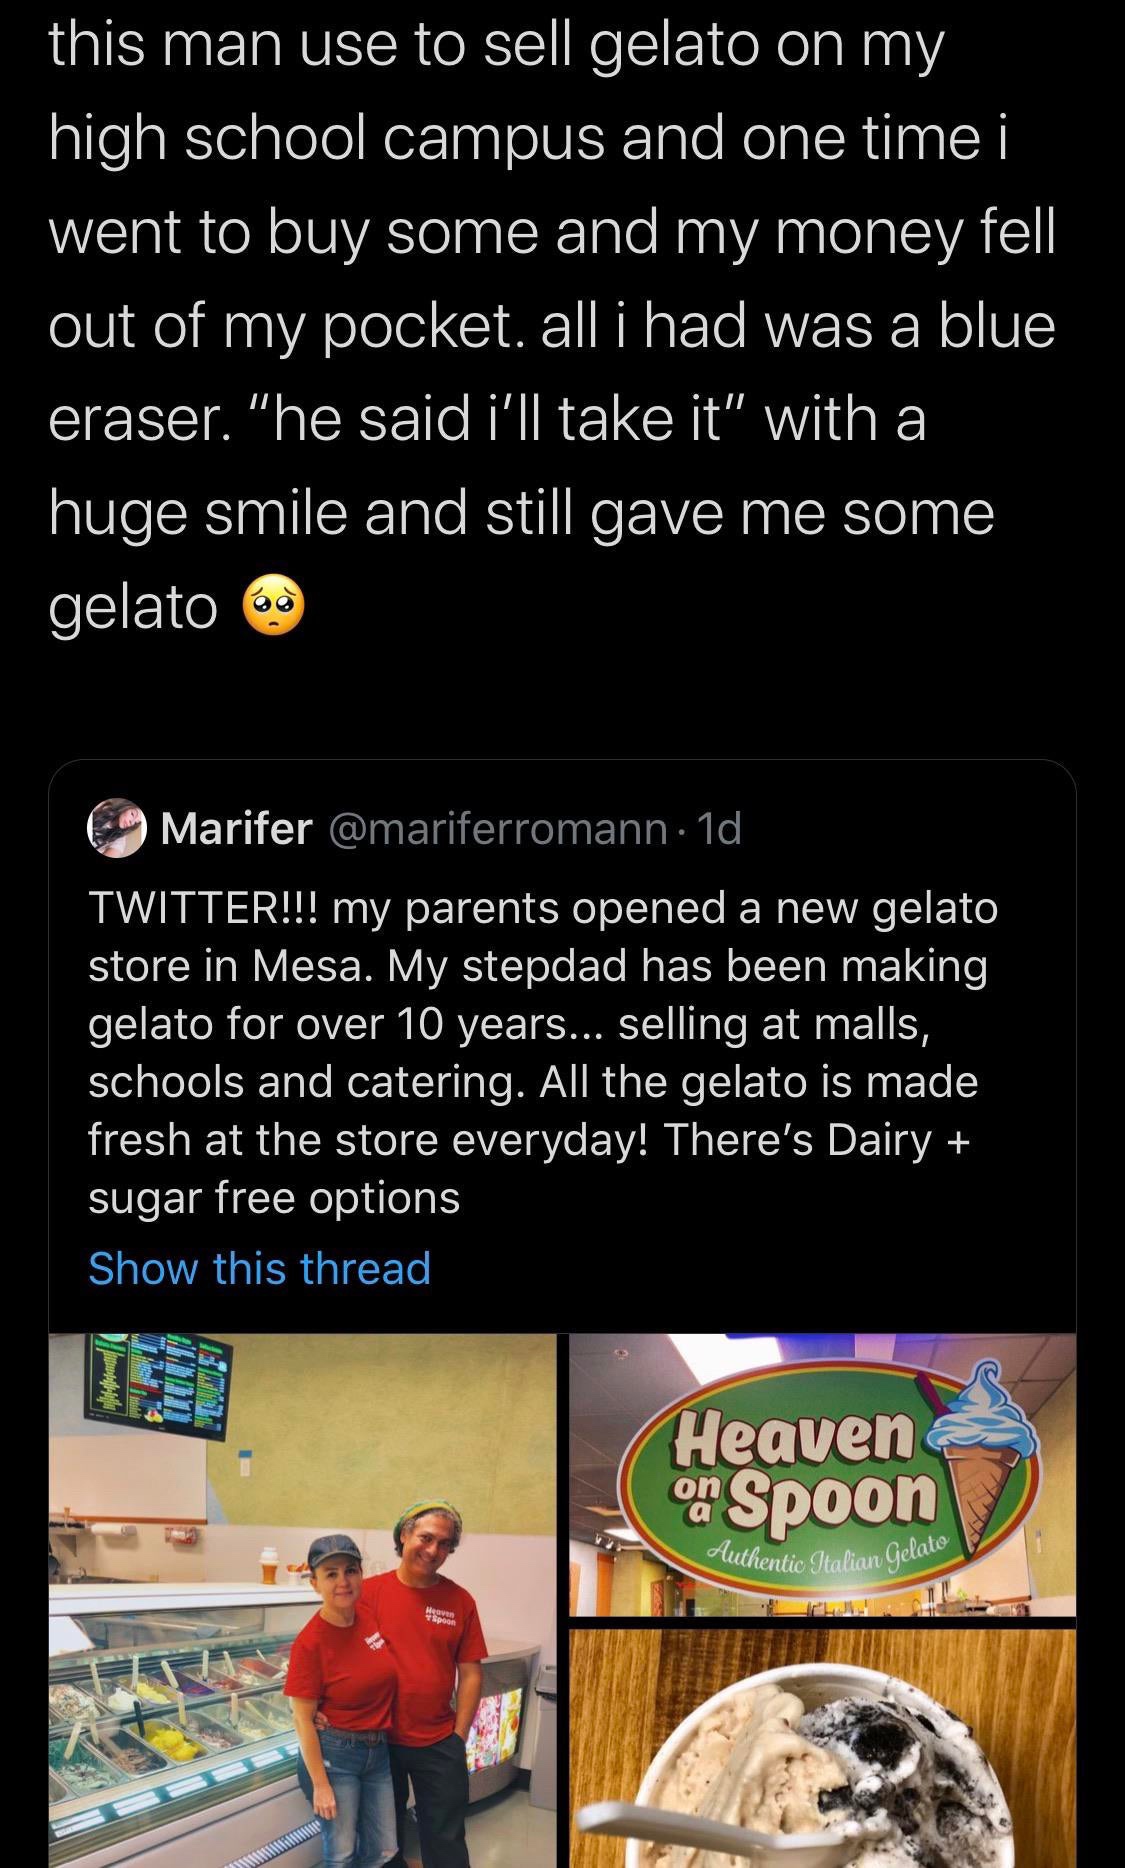 screenshot - this man use to sell gelato on my high school campus and one time i went to buy some and my money fell out of my pocket. all i had was a blue eraser. "he said i'll take it" with a huge smile and still gave me some gelato 6 Marifer . 1d Twitte